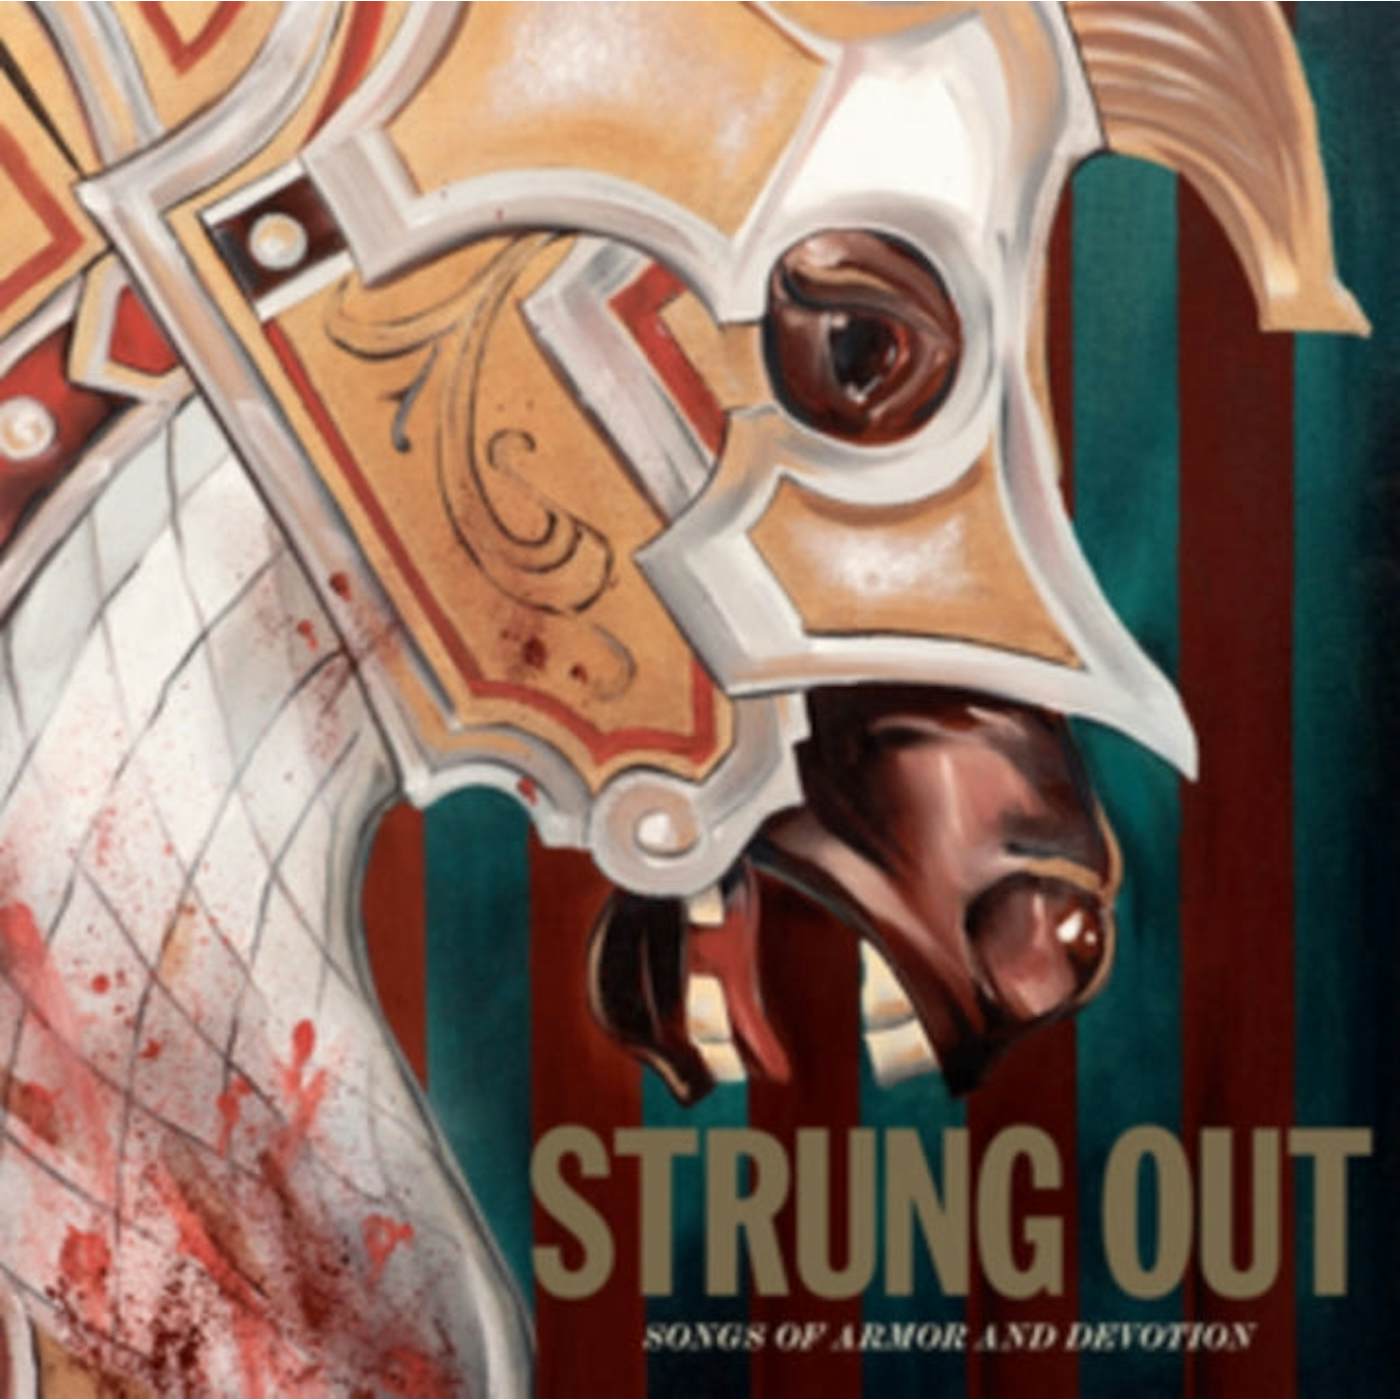 Strung Out CD - Songs Of Armor And Devotion